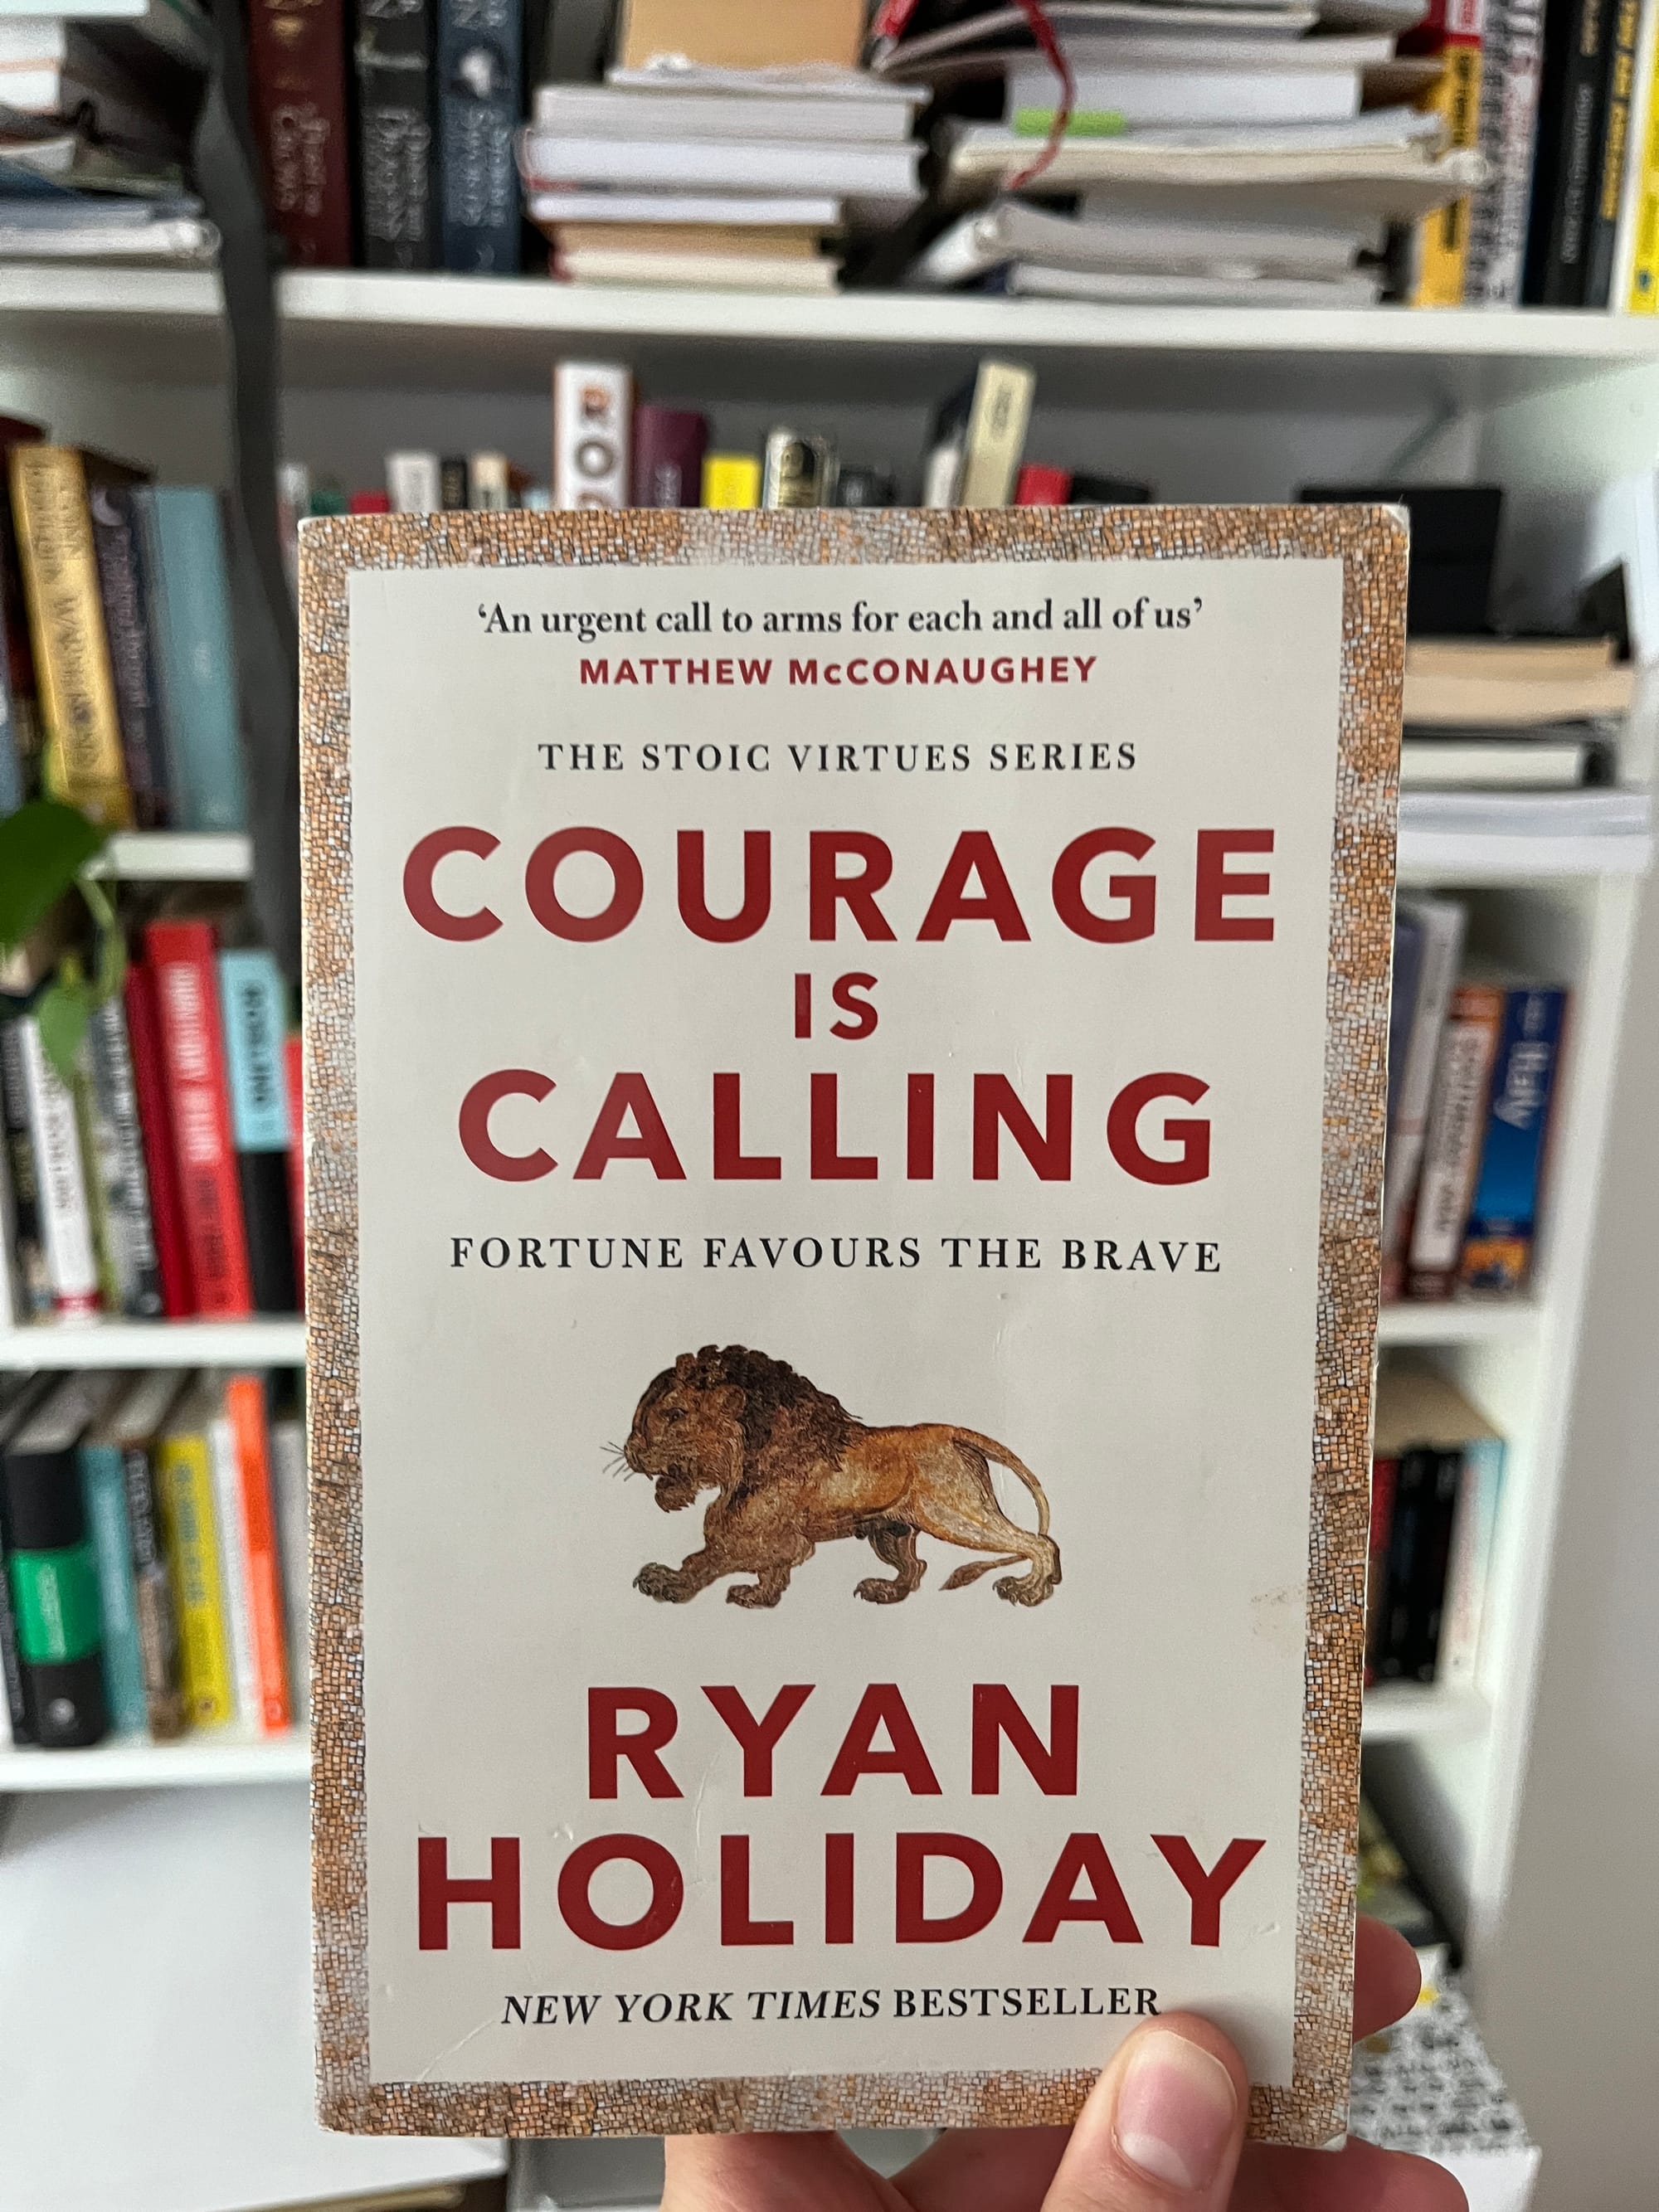 Photo of the book cover for Courage is Calling by Ryan Holiday